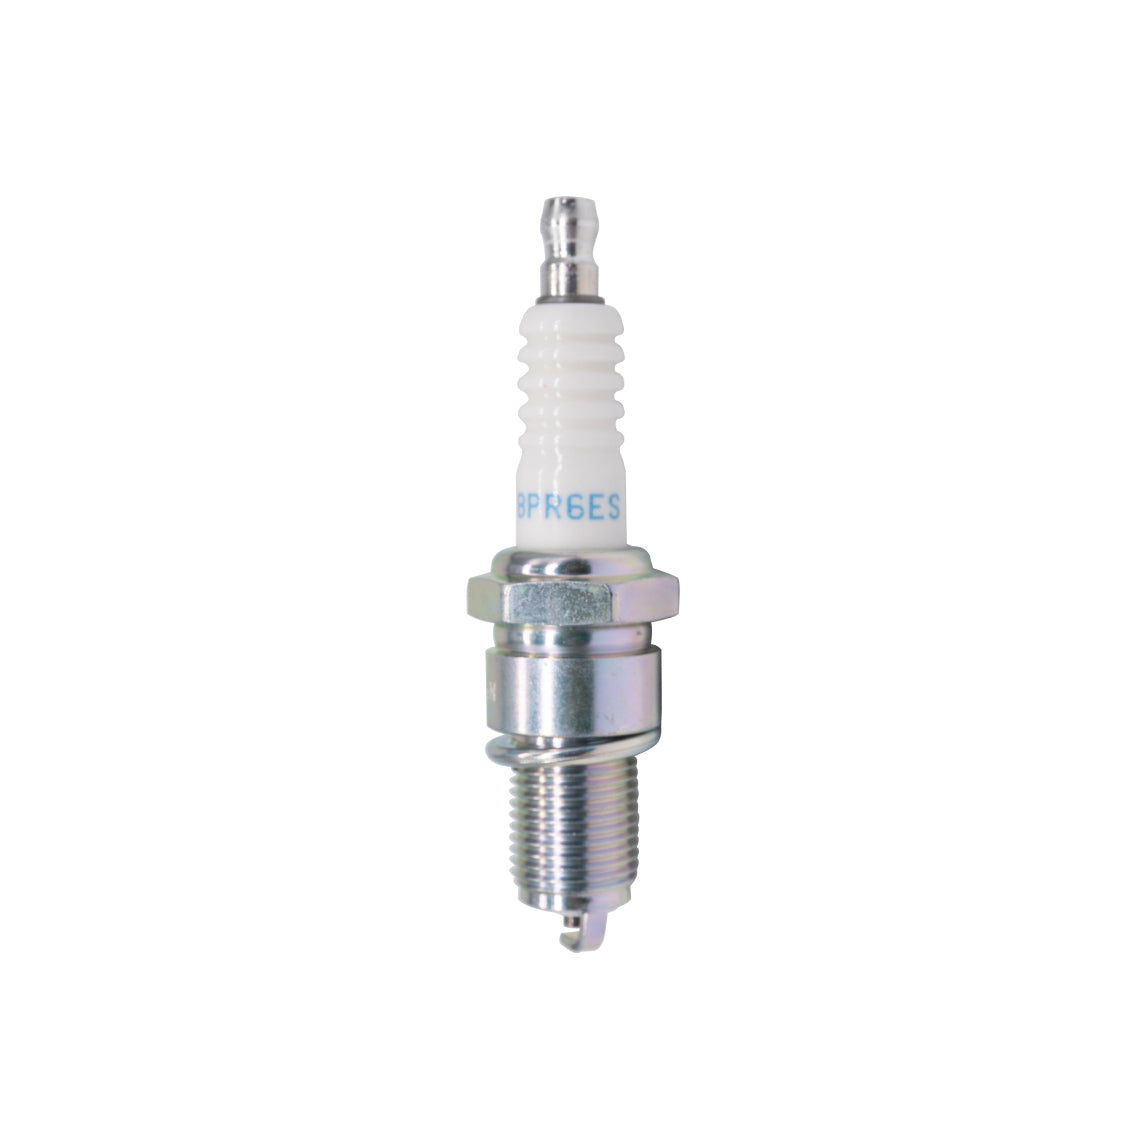 This is an NGK 7131 BPR6ES Spark Plug for Evinrude/Johnson 2-Stroke outboard motors (5030600).